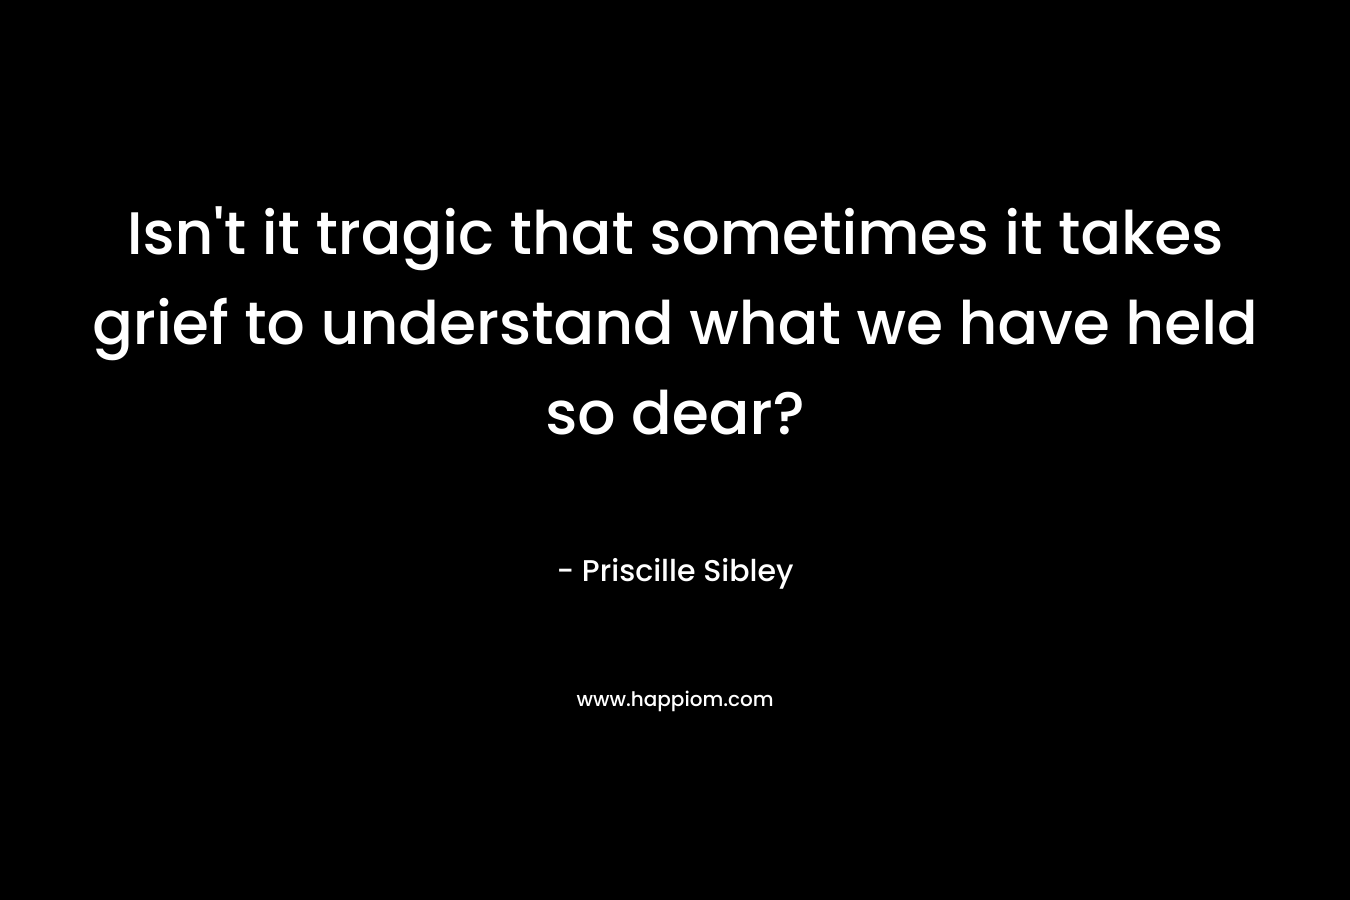 Isn’t it tragic that sometimes it takes grief to understand what we have held so dear? – Priscille Sibley